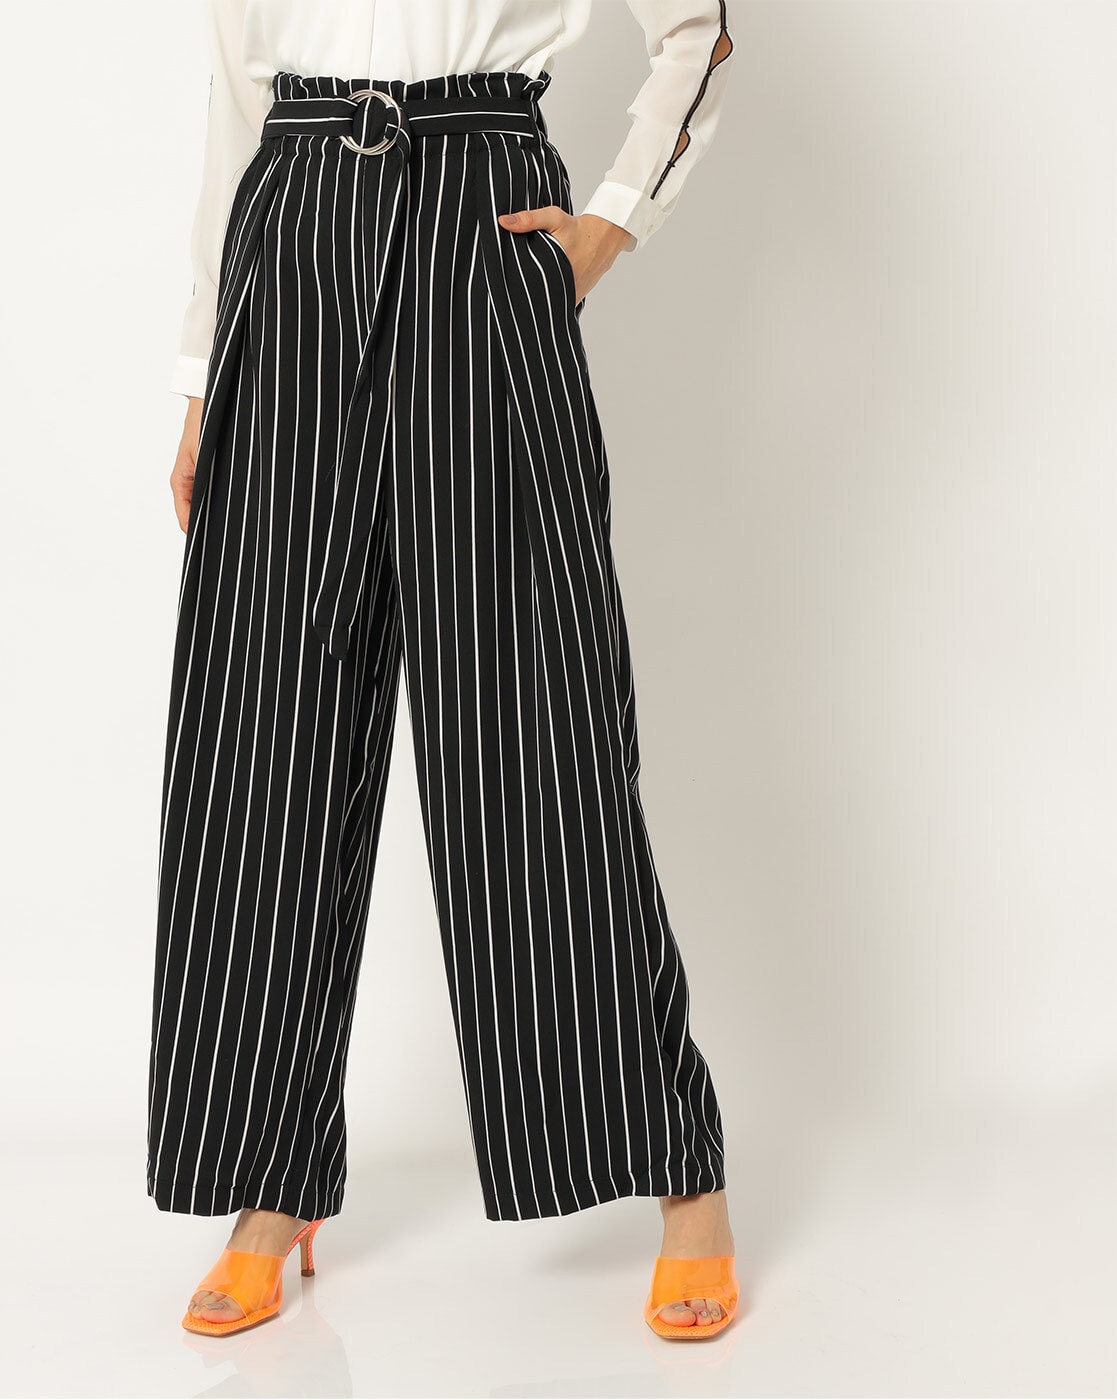 River Island tapered trousers with ring detail in black stripe  ASOS